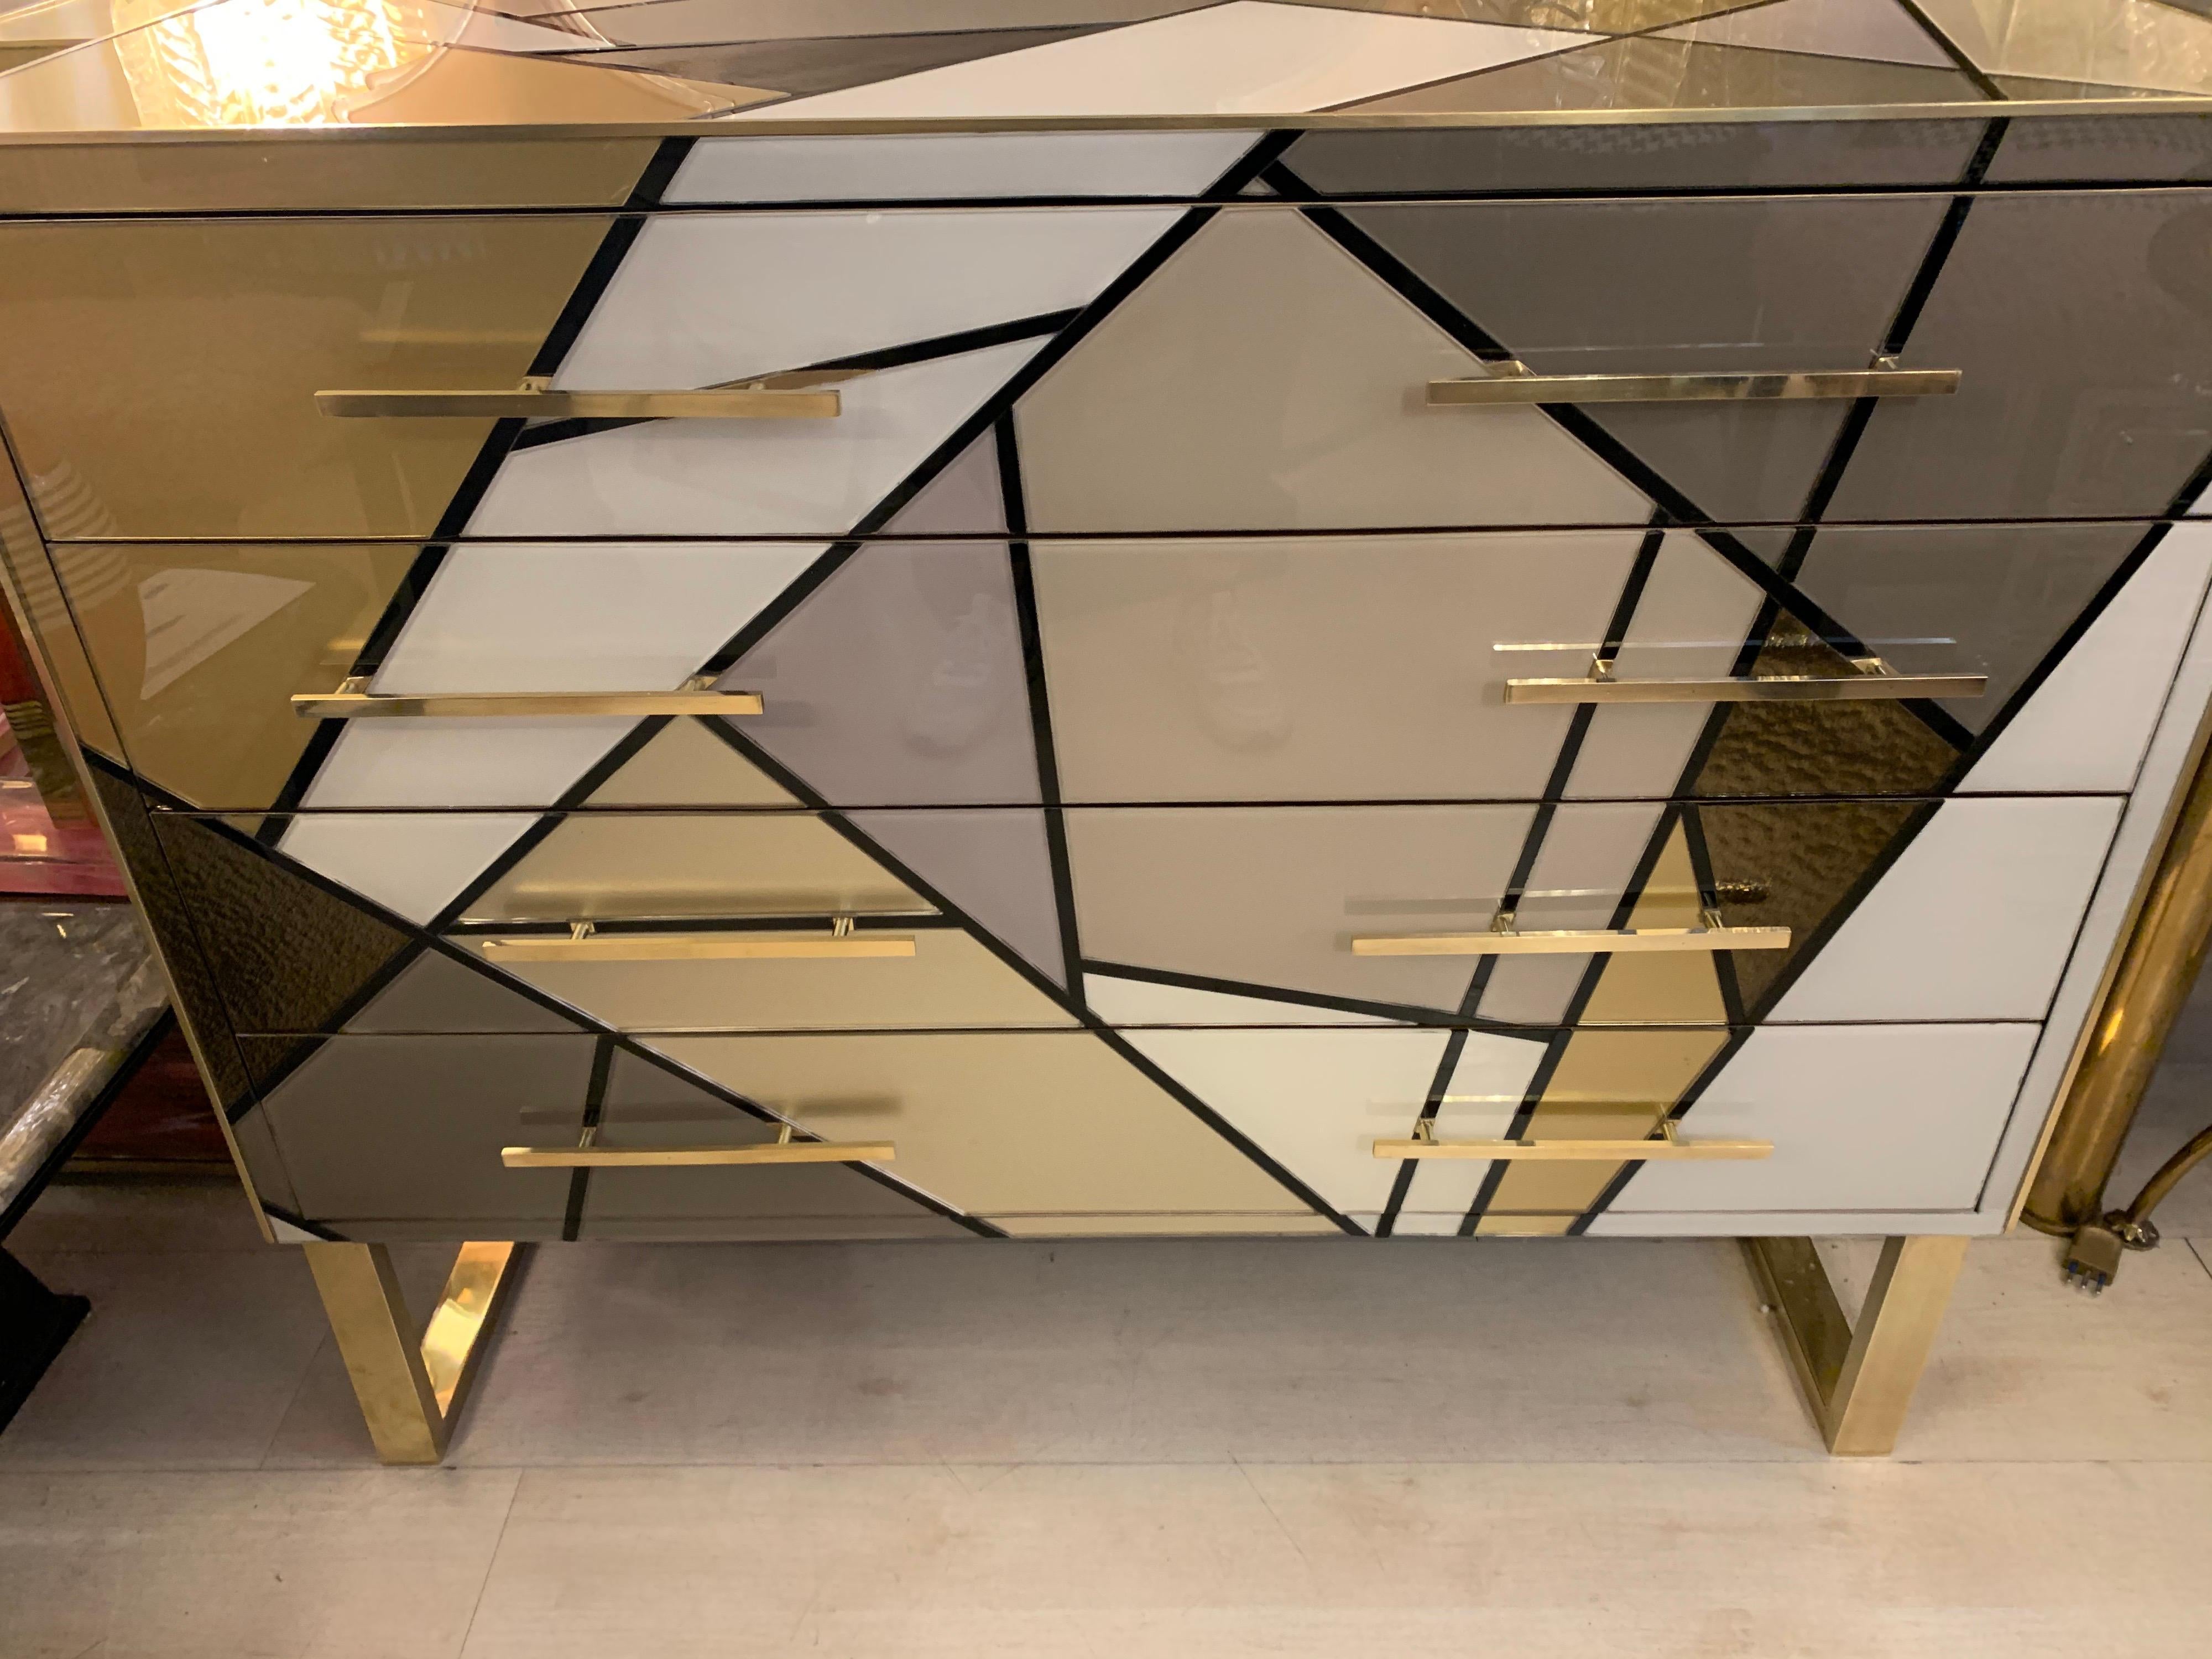 Late 20th Century Italian Multicolored Opaline Glass Chest of Drawers with Geometric Design, 1980s